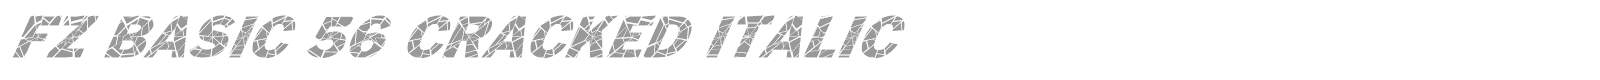 FZ BASIC 56 CRACKED ITALIC font preview